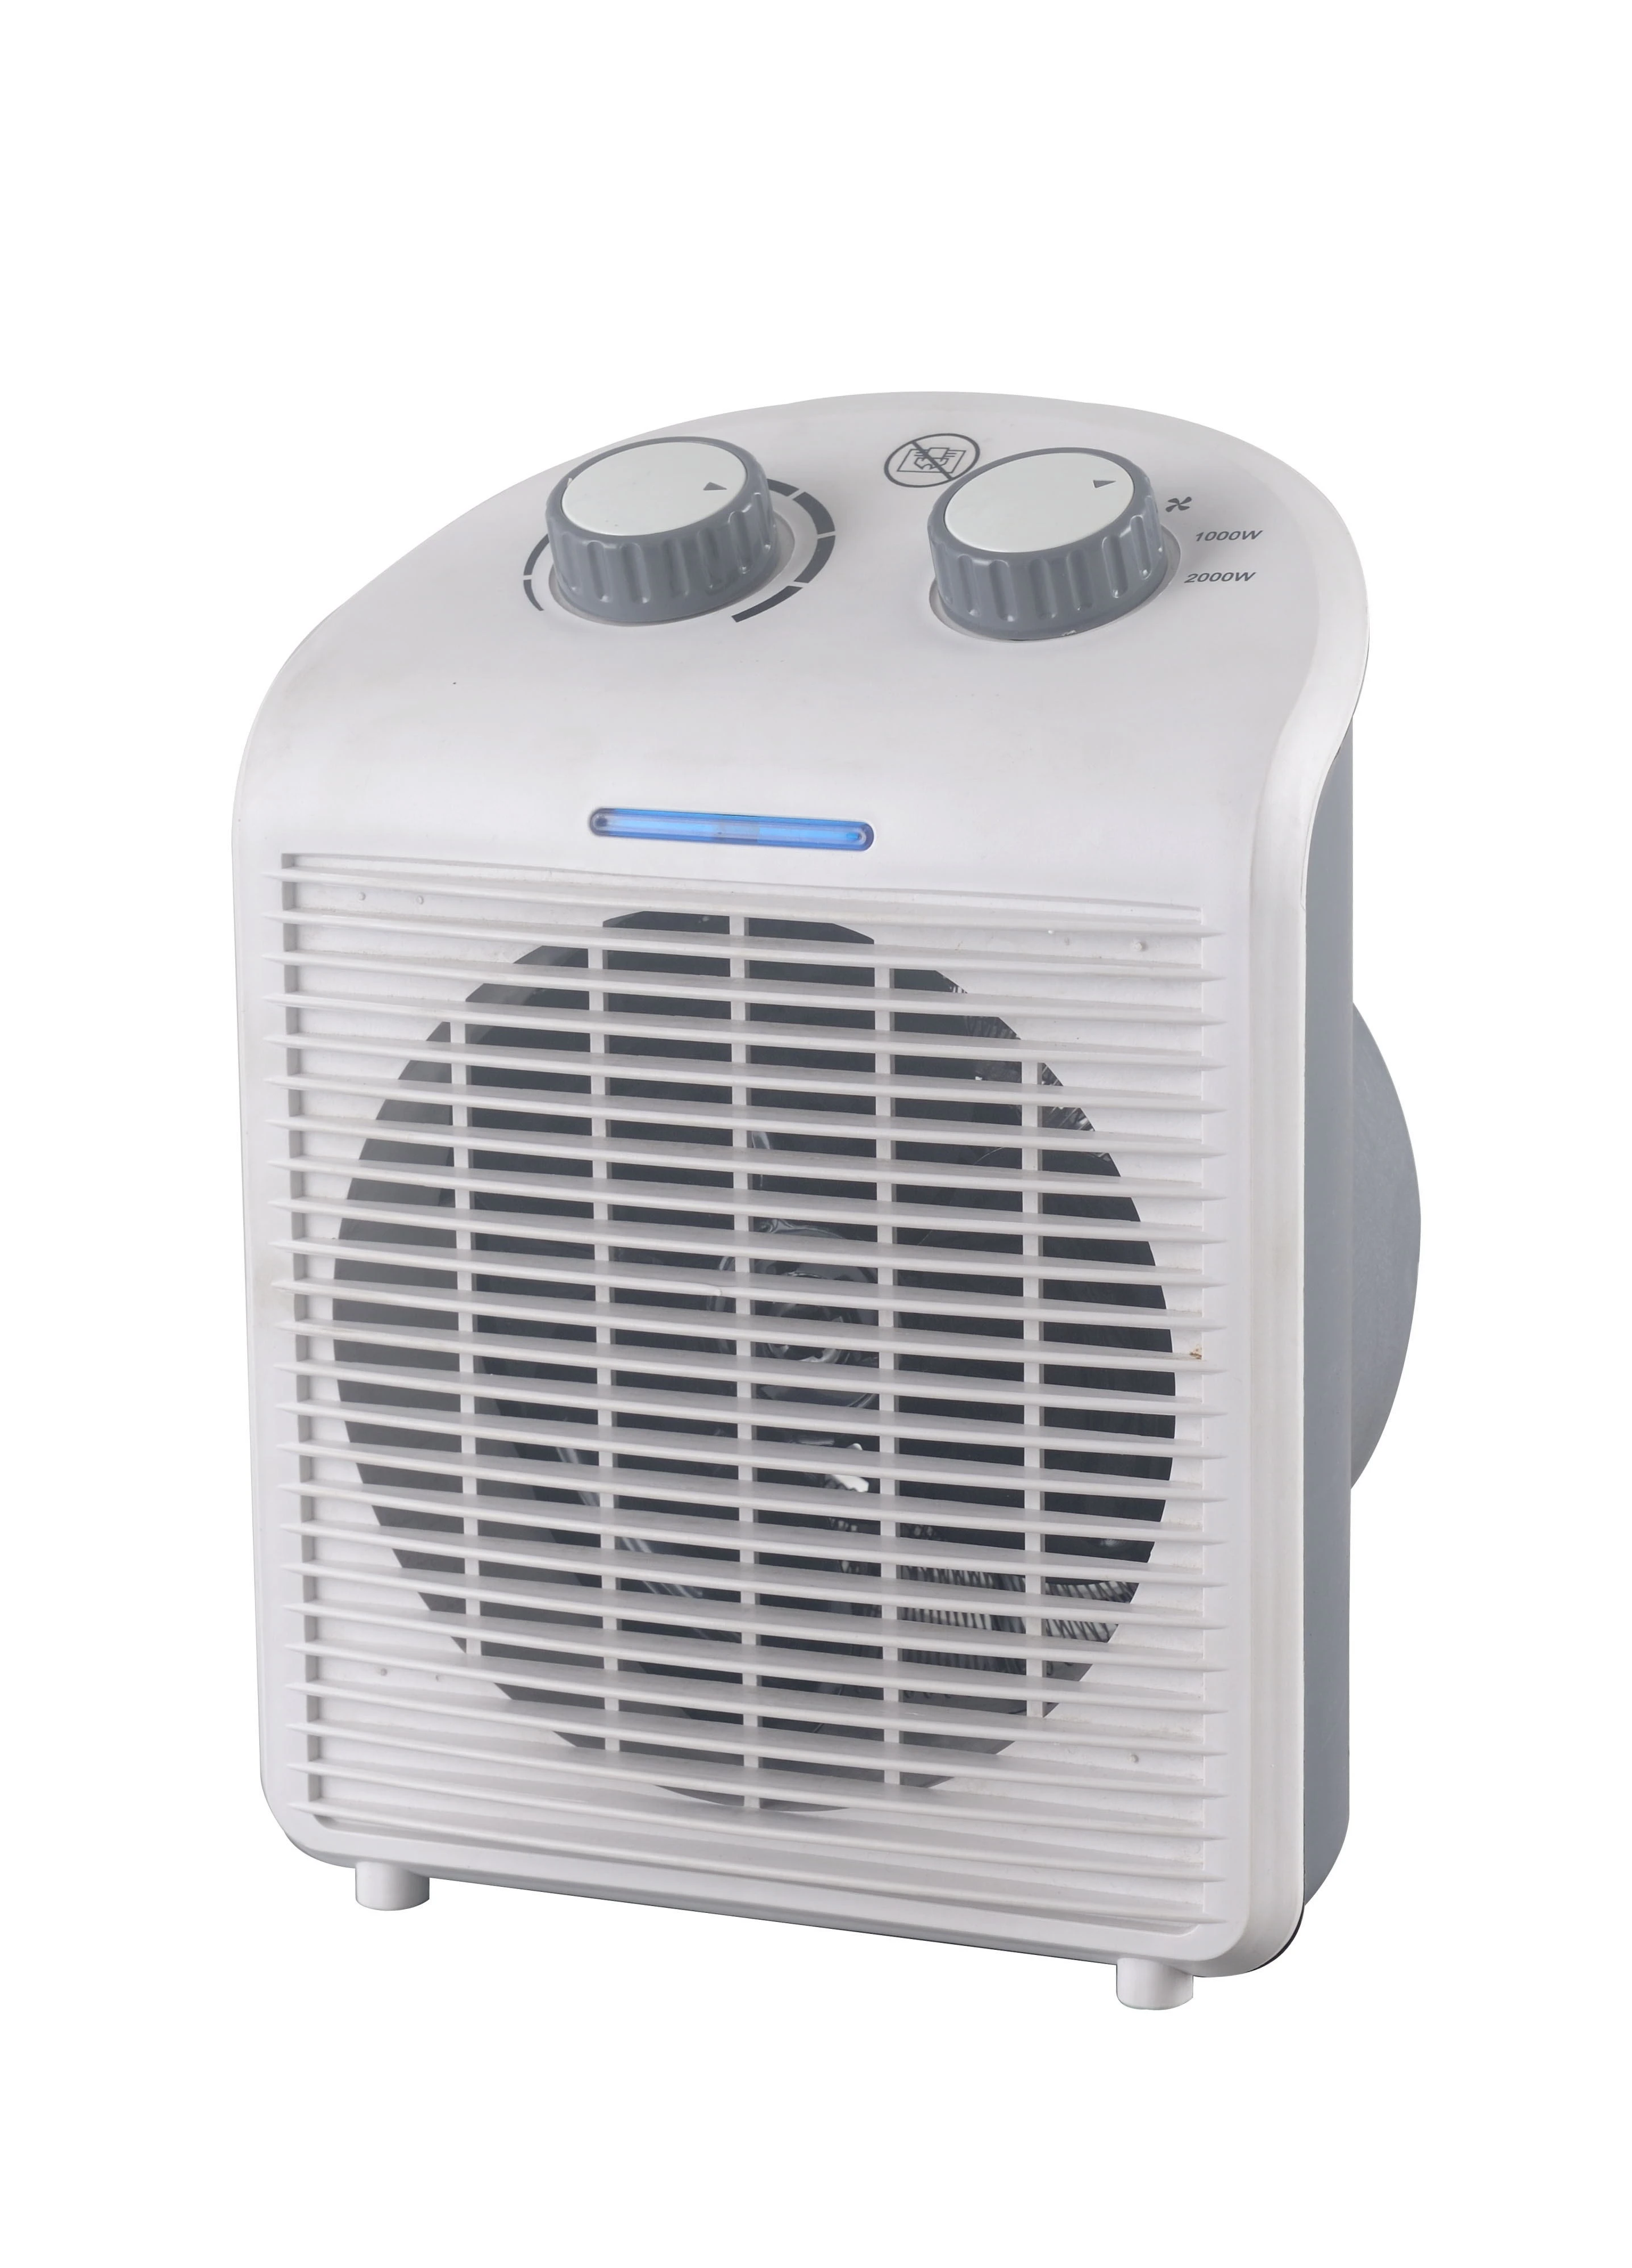 Discounting adjustable room electric fan heater